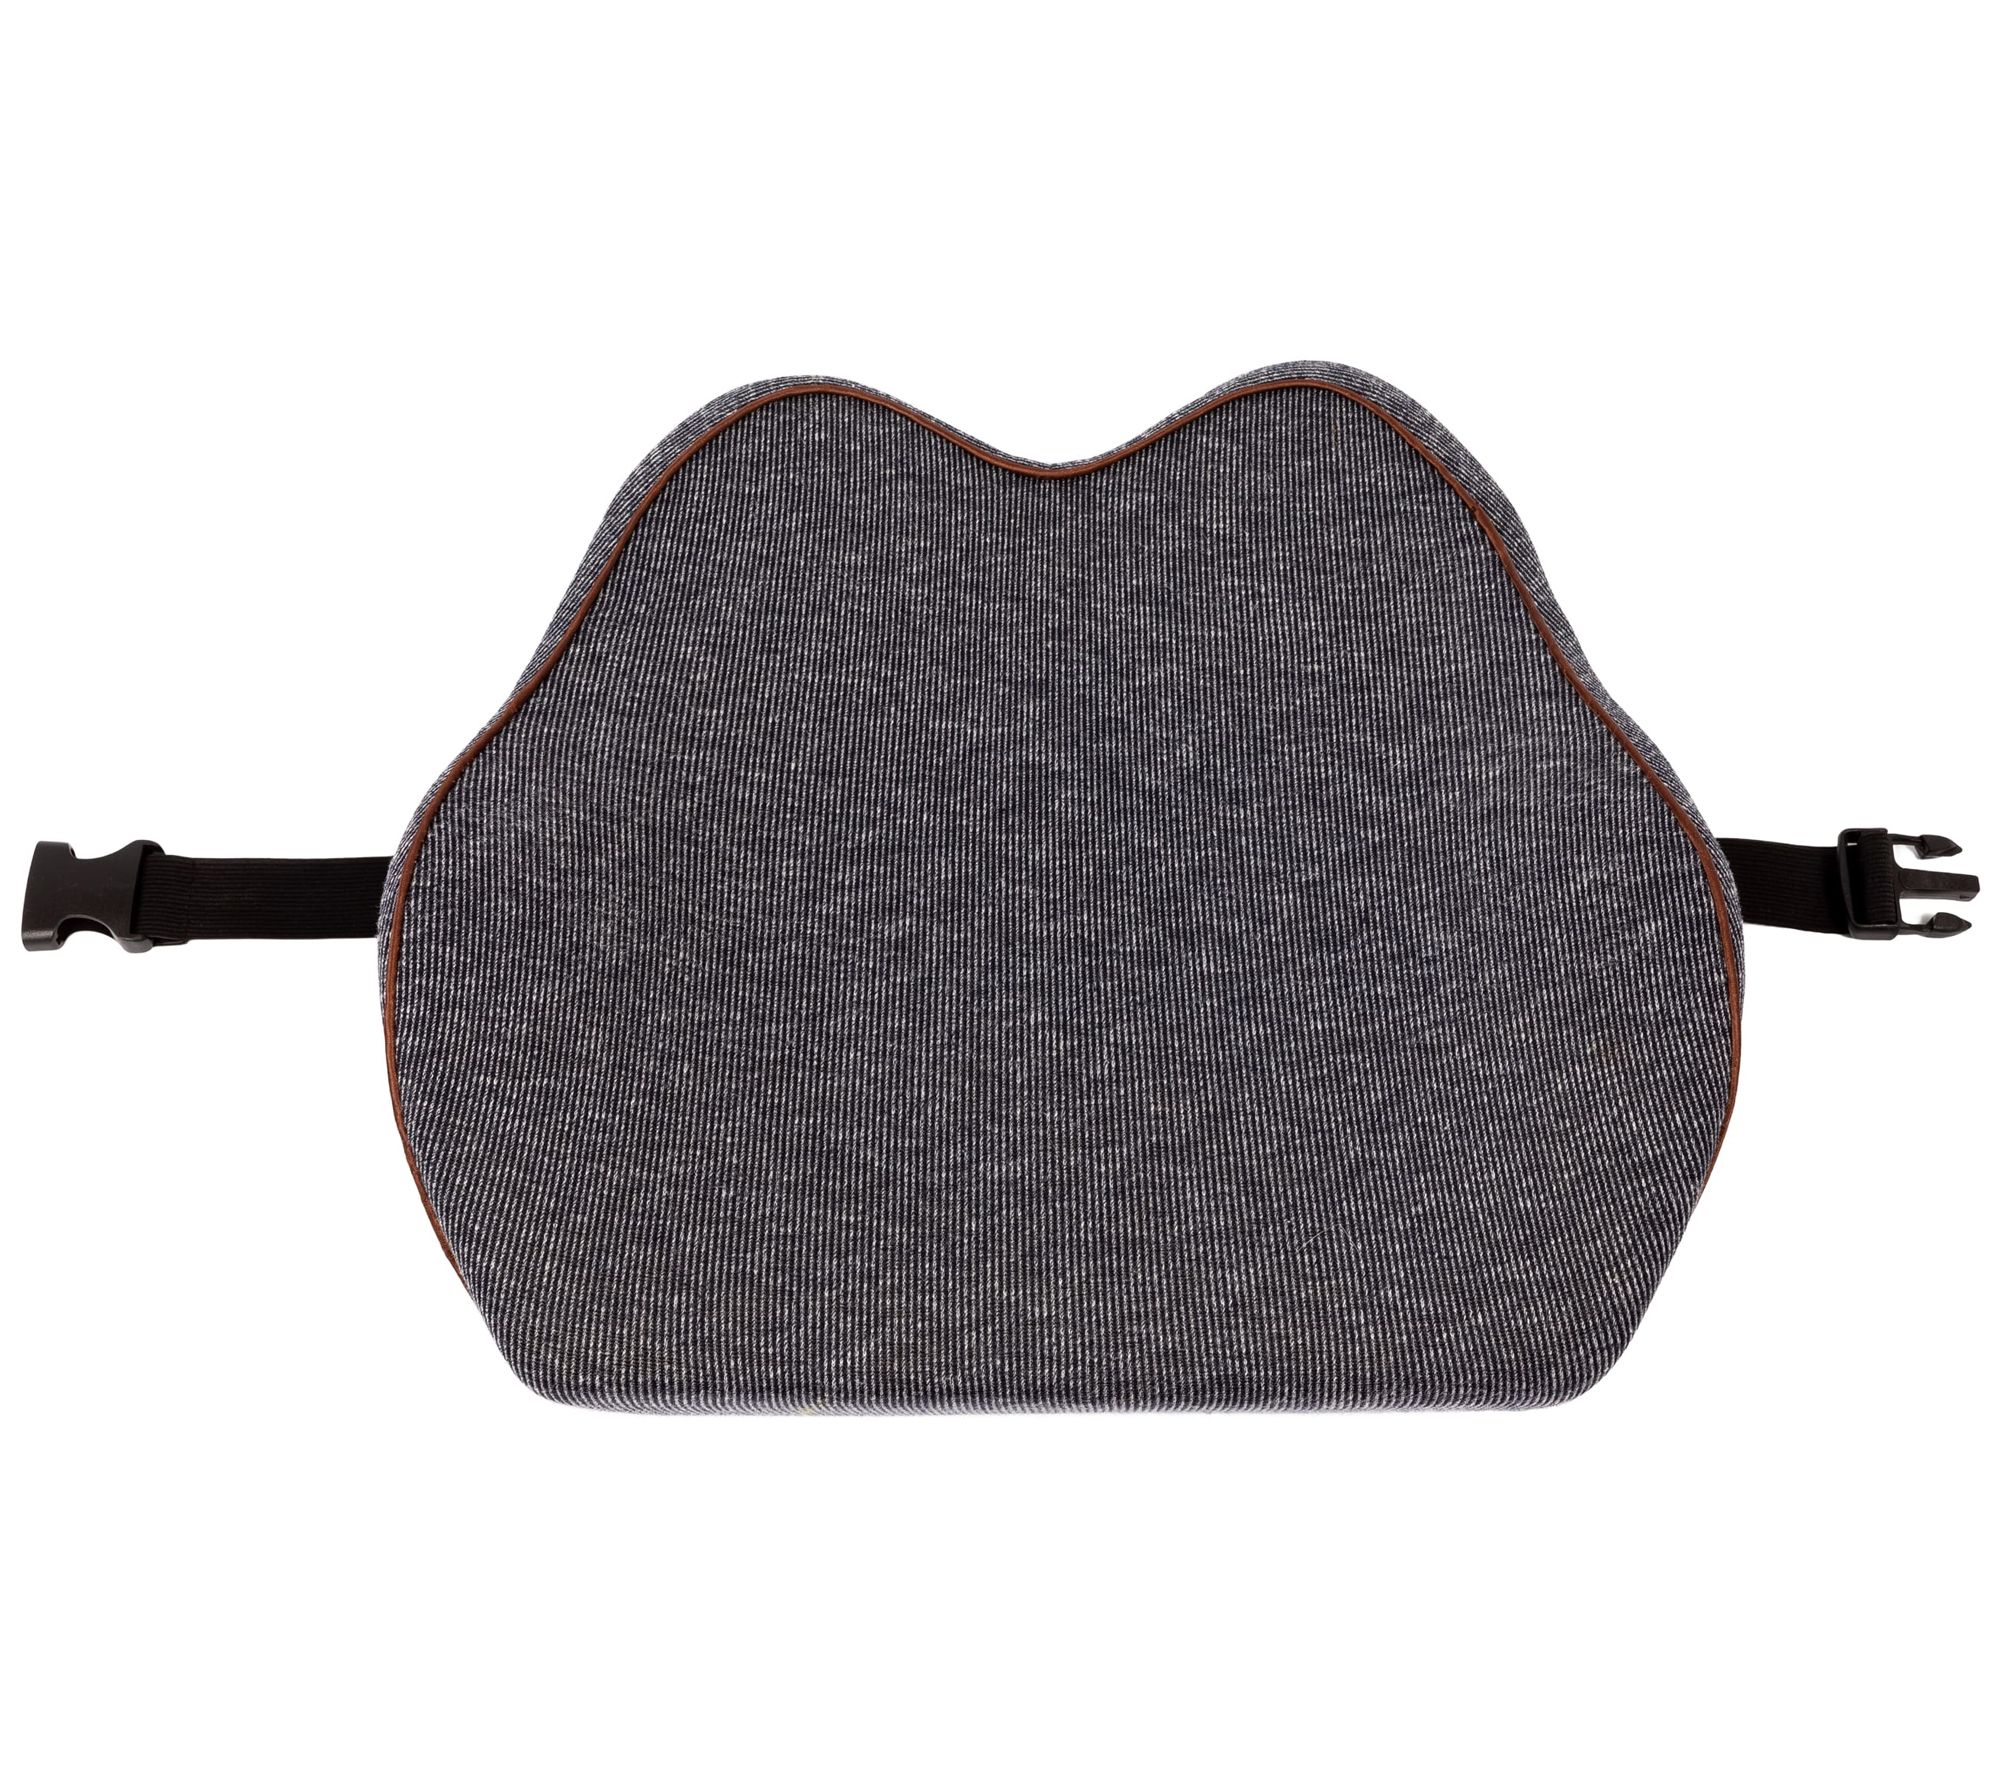 Cushion Lab Lumbar Pillow and Seat Cushion Review - Will I Keep or Return  Them?? 